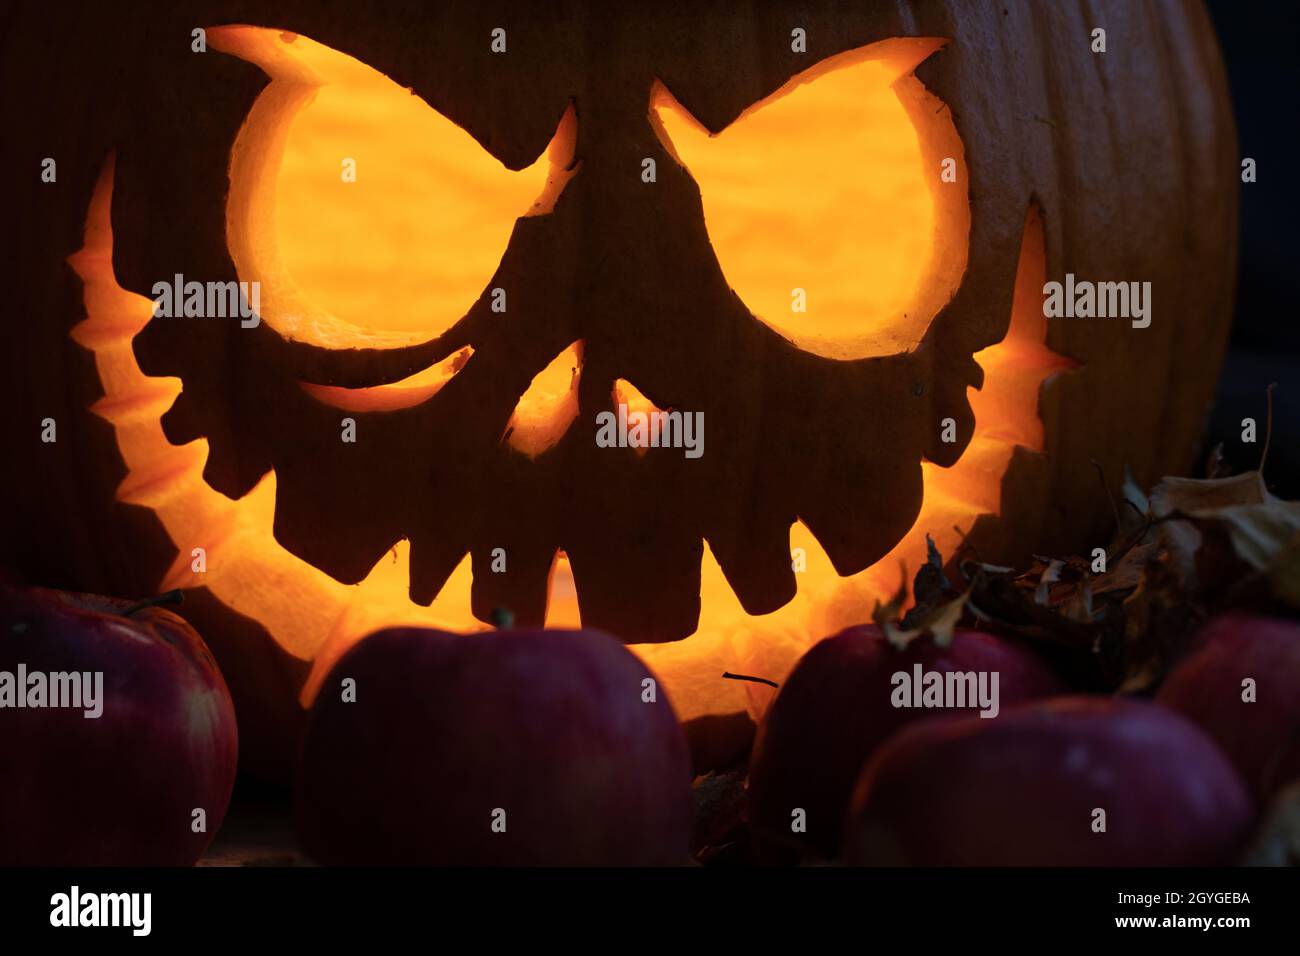 Carved shining orange pumpkin on black background. Some red apples in foreground. Decoration for Halloween party. Jack-o-lantern adds some horror and Stock Photo